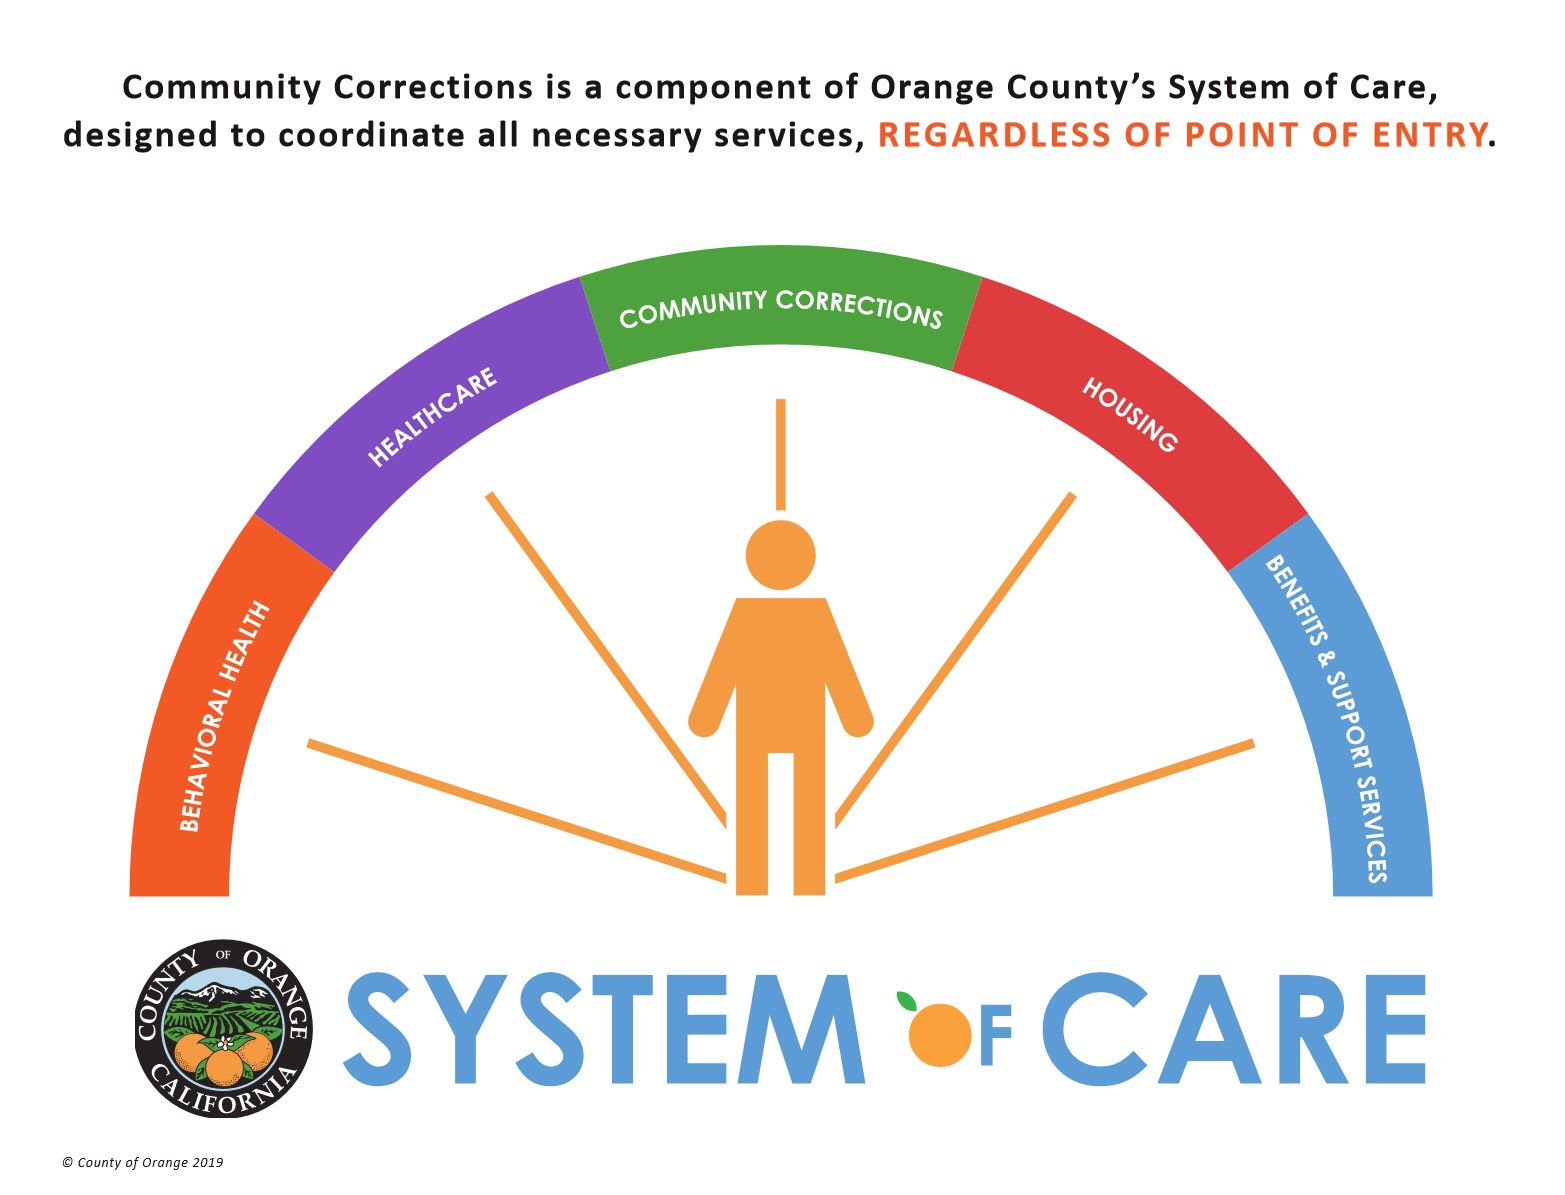 Homelessness: Orange County Launches System of Care to Break Mental Illness-Addiction-Homelessness-Incarceration Cycle